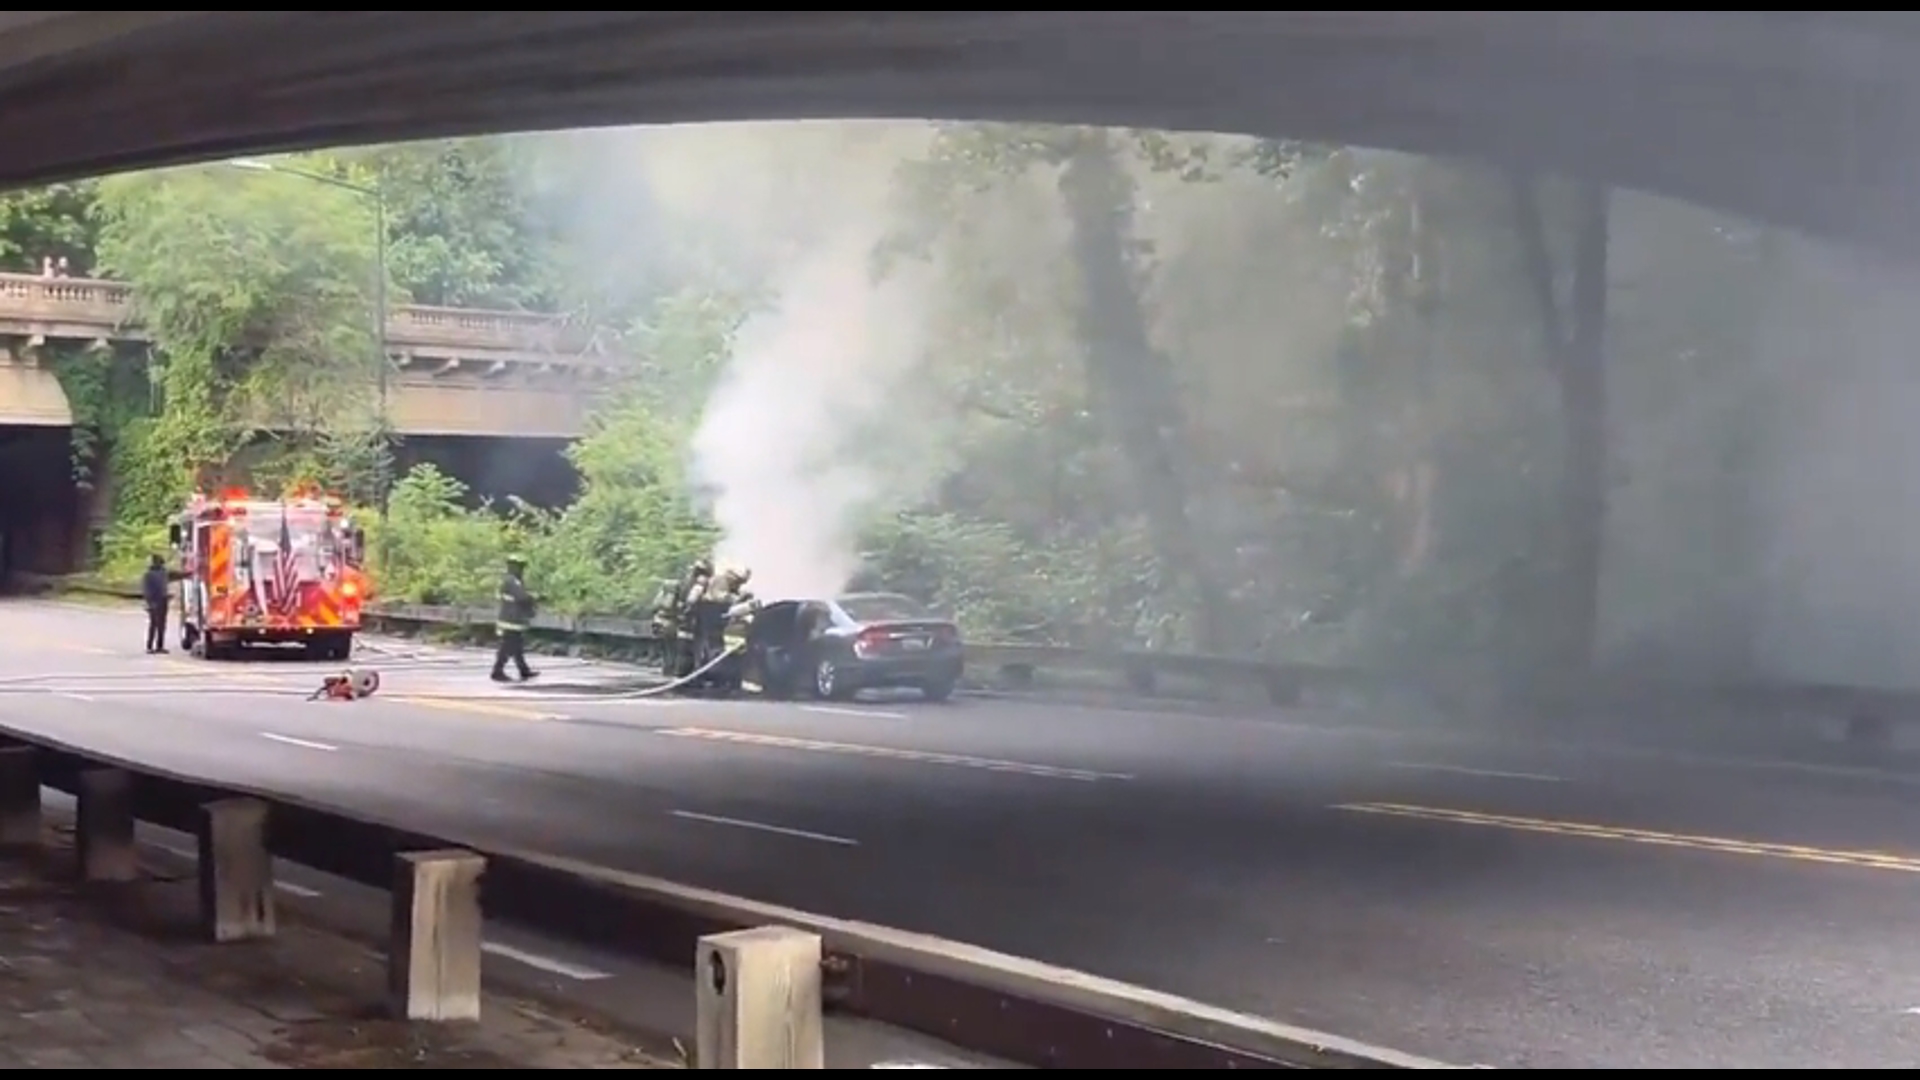 A car fire closed a portion of Rock Creek Parkway